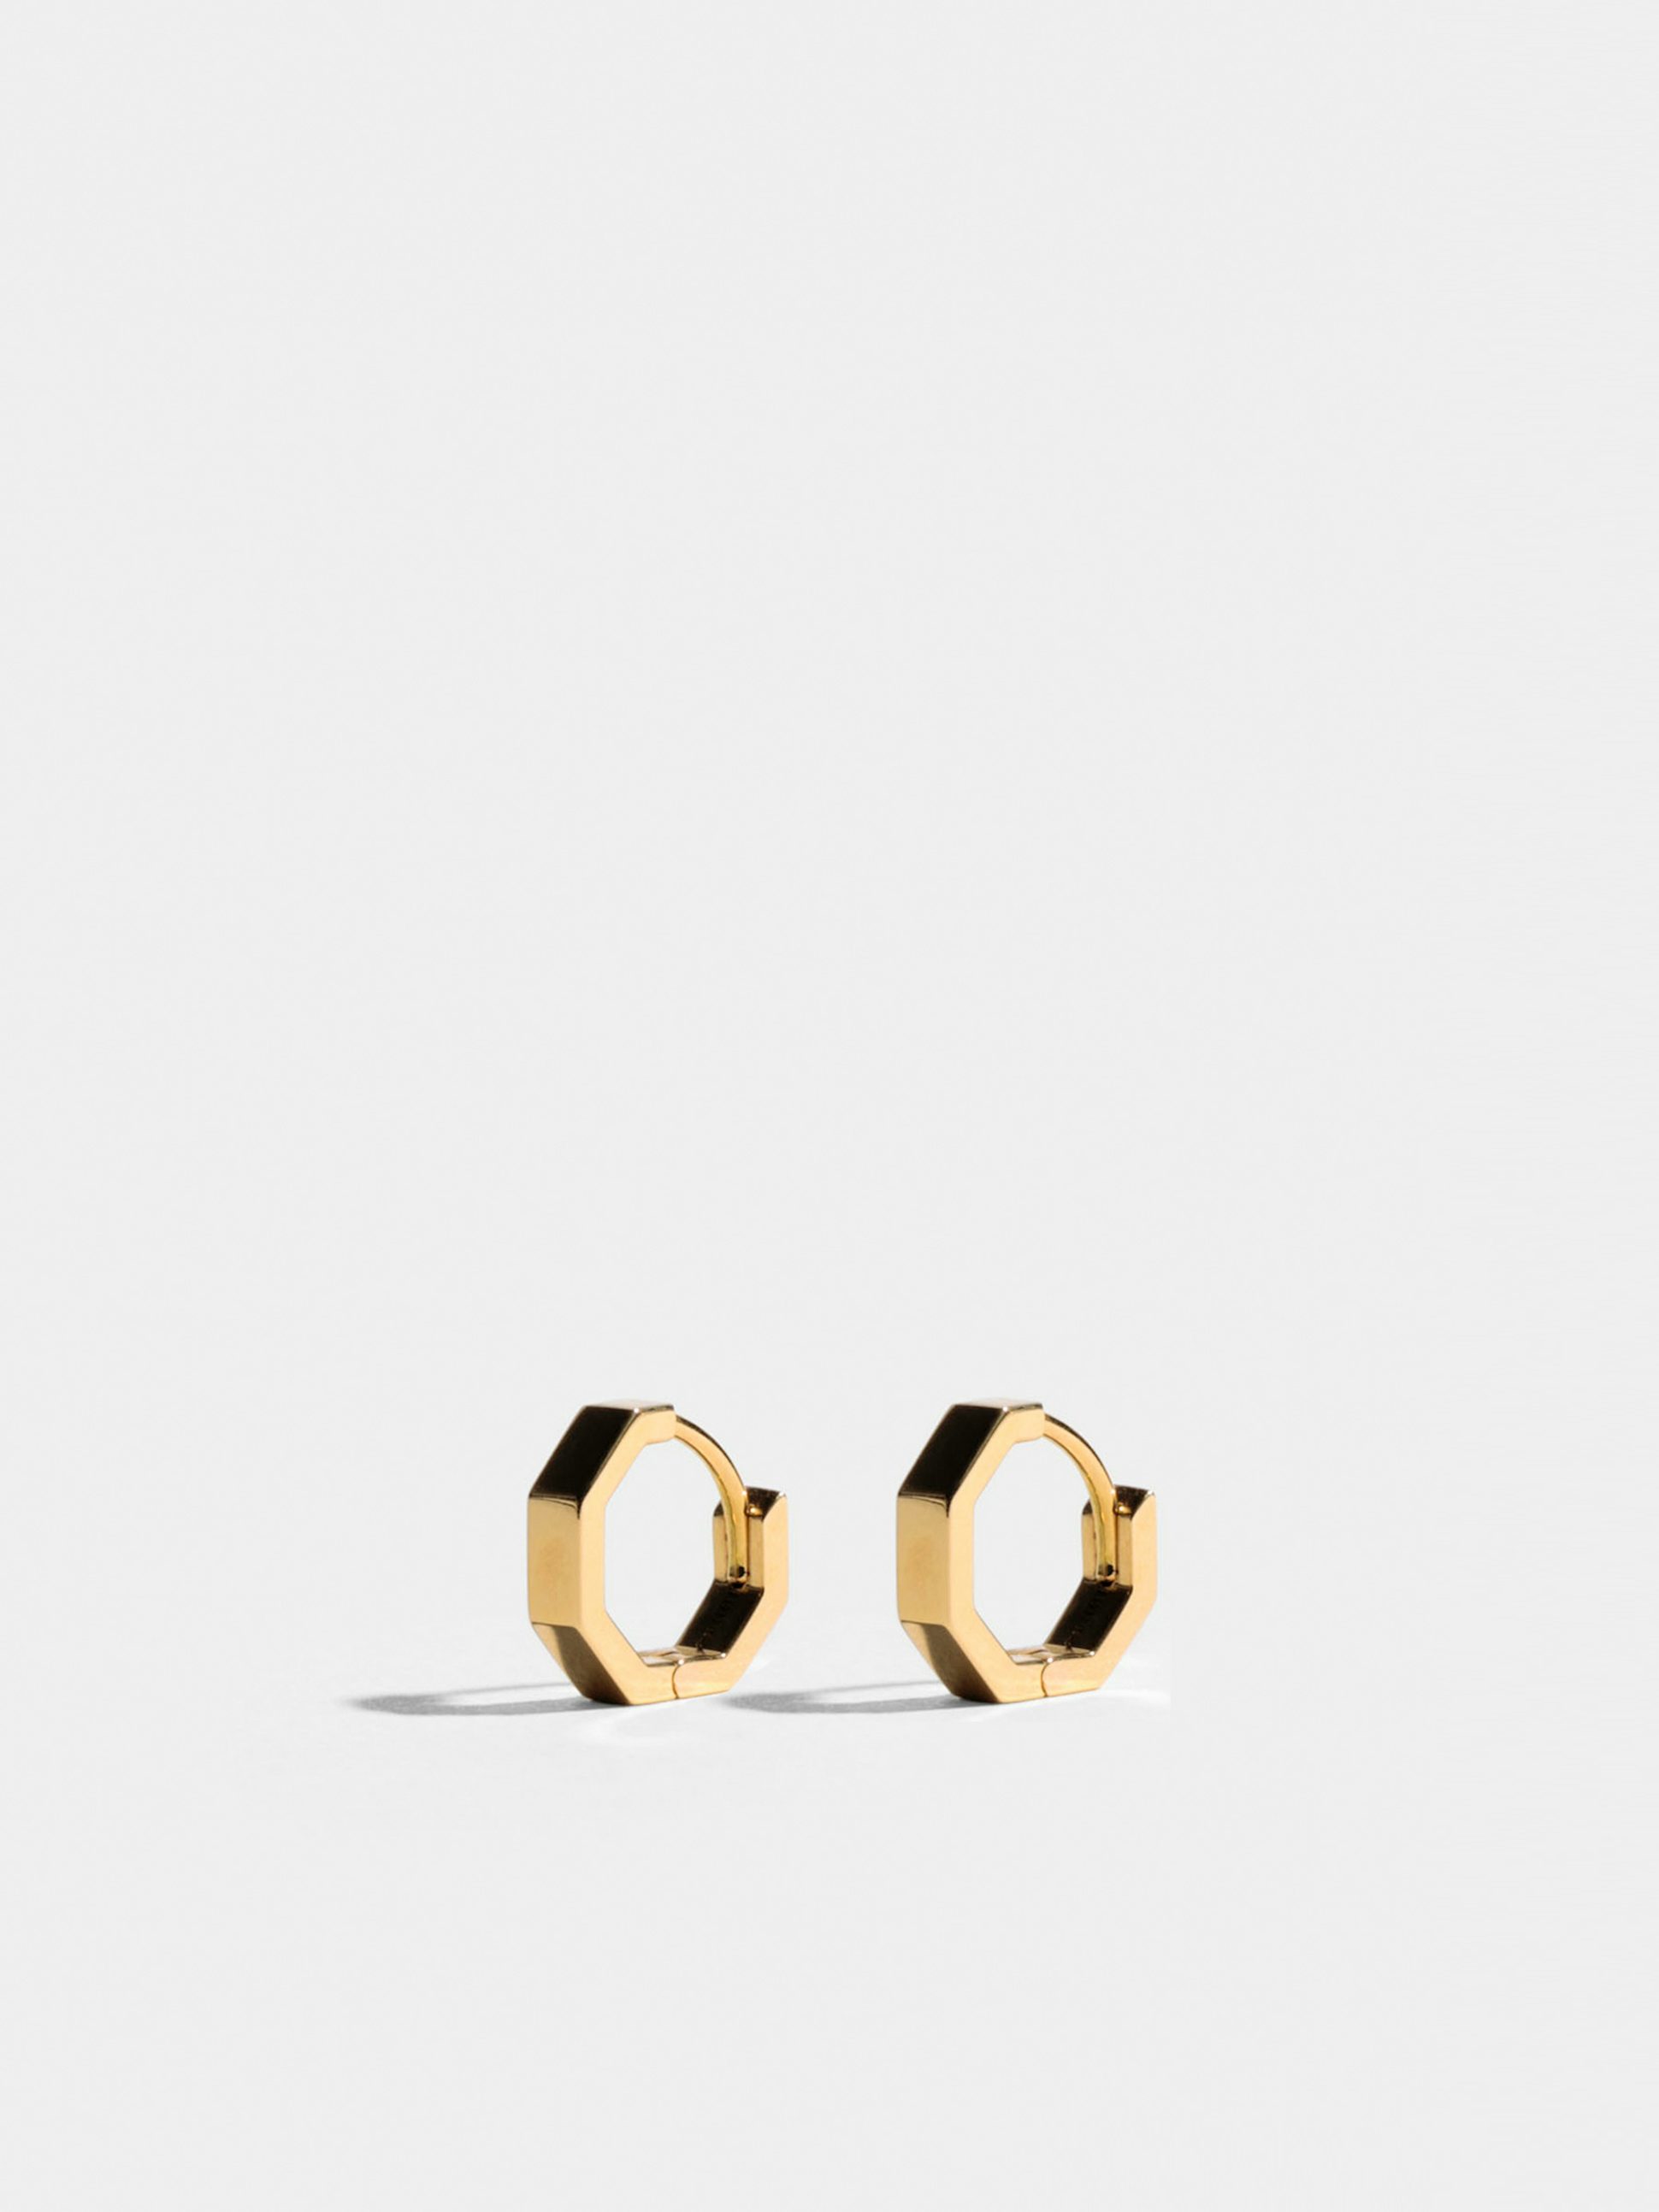 Octogone 10mm earrings in 18k Fairmined ethical yellow gold, the pair.